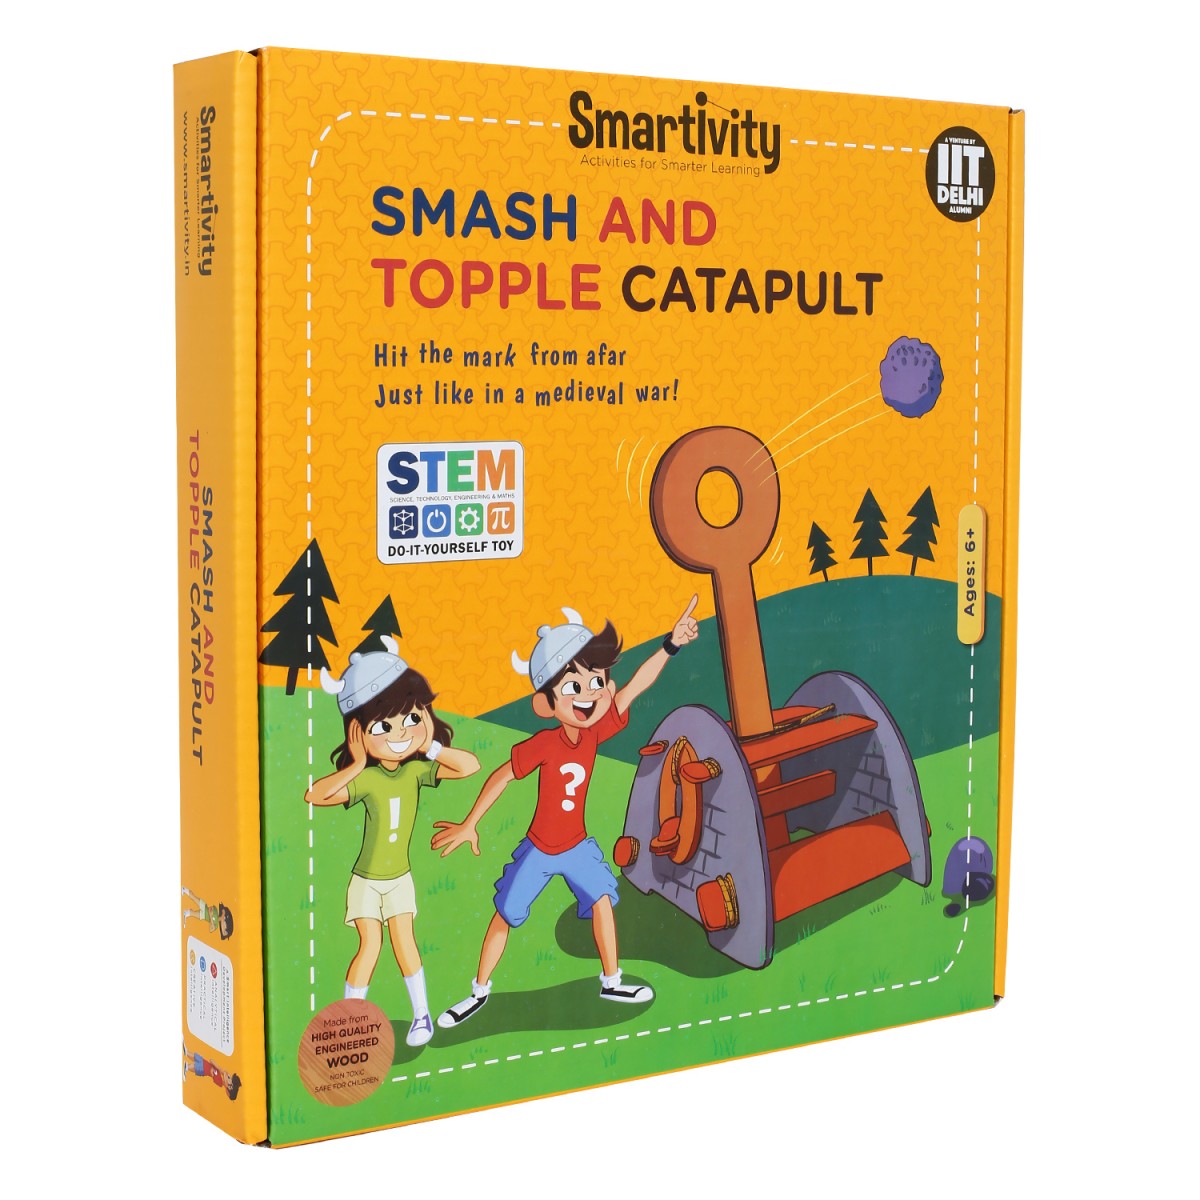 Smartivity Smash And Topple Catapult: Stem, Learning, Educational and Construction Activity Toy STEM for Kids age 6Y+ 